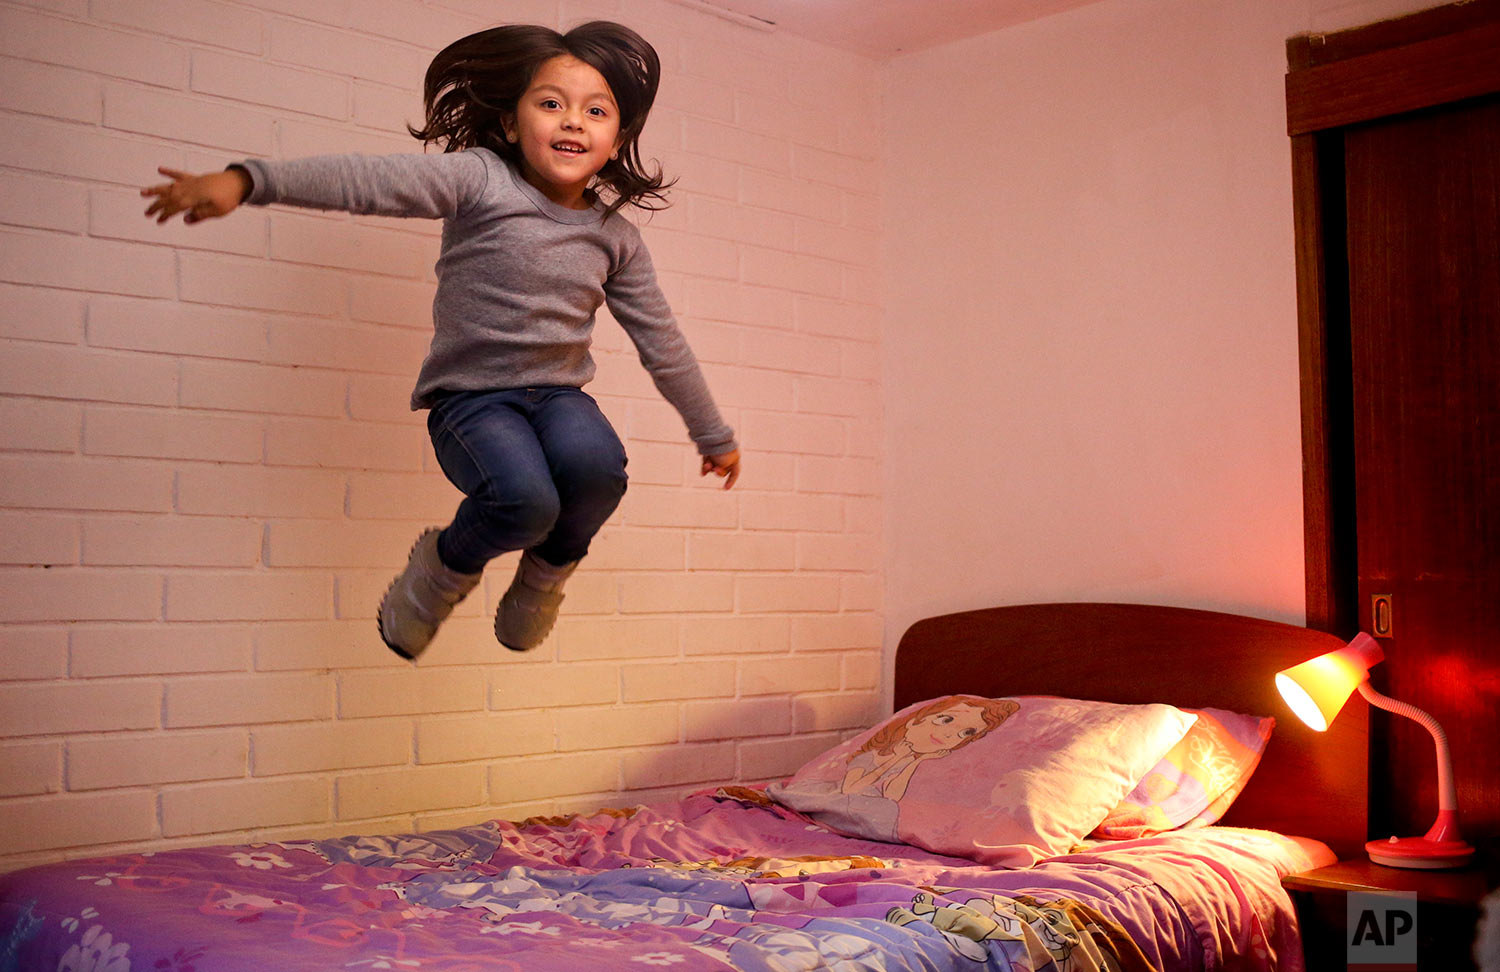  In this July 9, 2017 photo,  Mathilda jumps on her bed as the poses for a picture at her home in Santiago, Chile. Mathilda, 6, was born a boy but began identifying herself as a girl one year ago, and is accepted as a girl by her classmates and teach